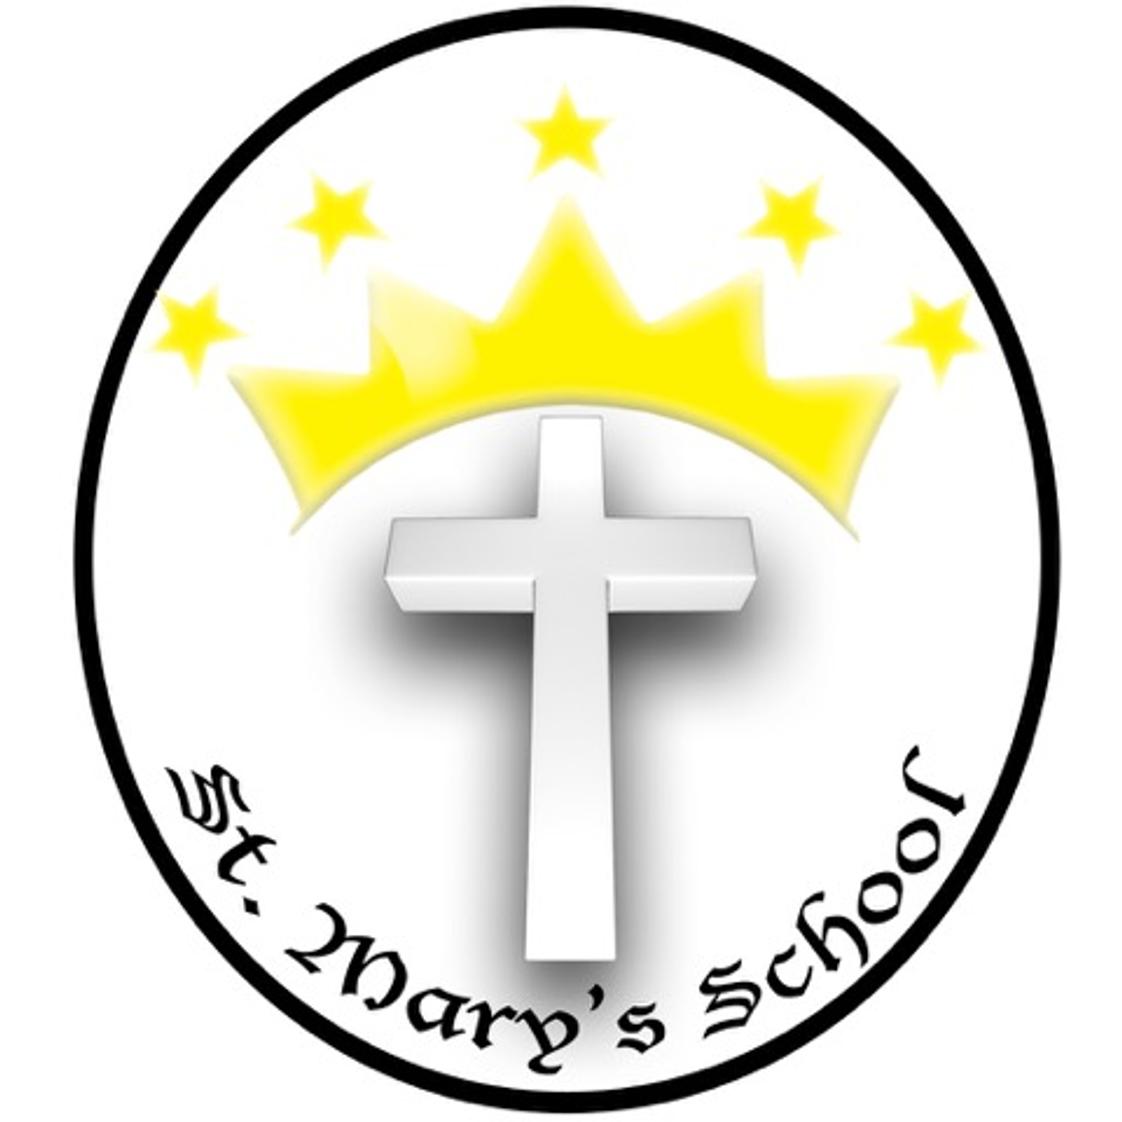 St. Mary's School Photo #1 - Our logo.